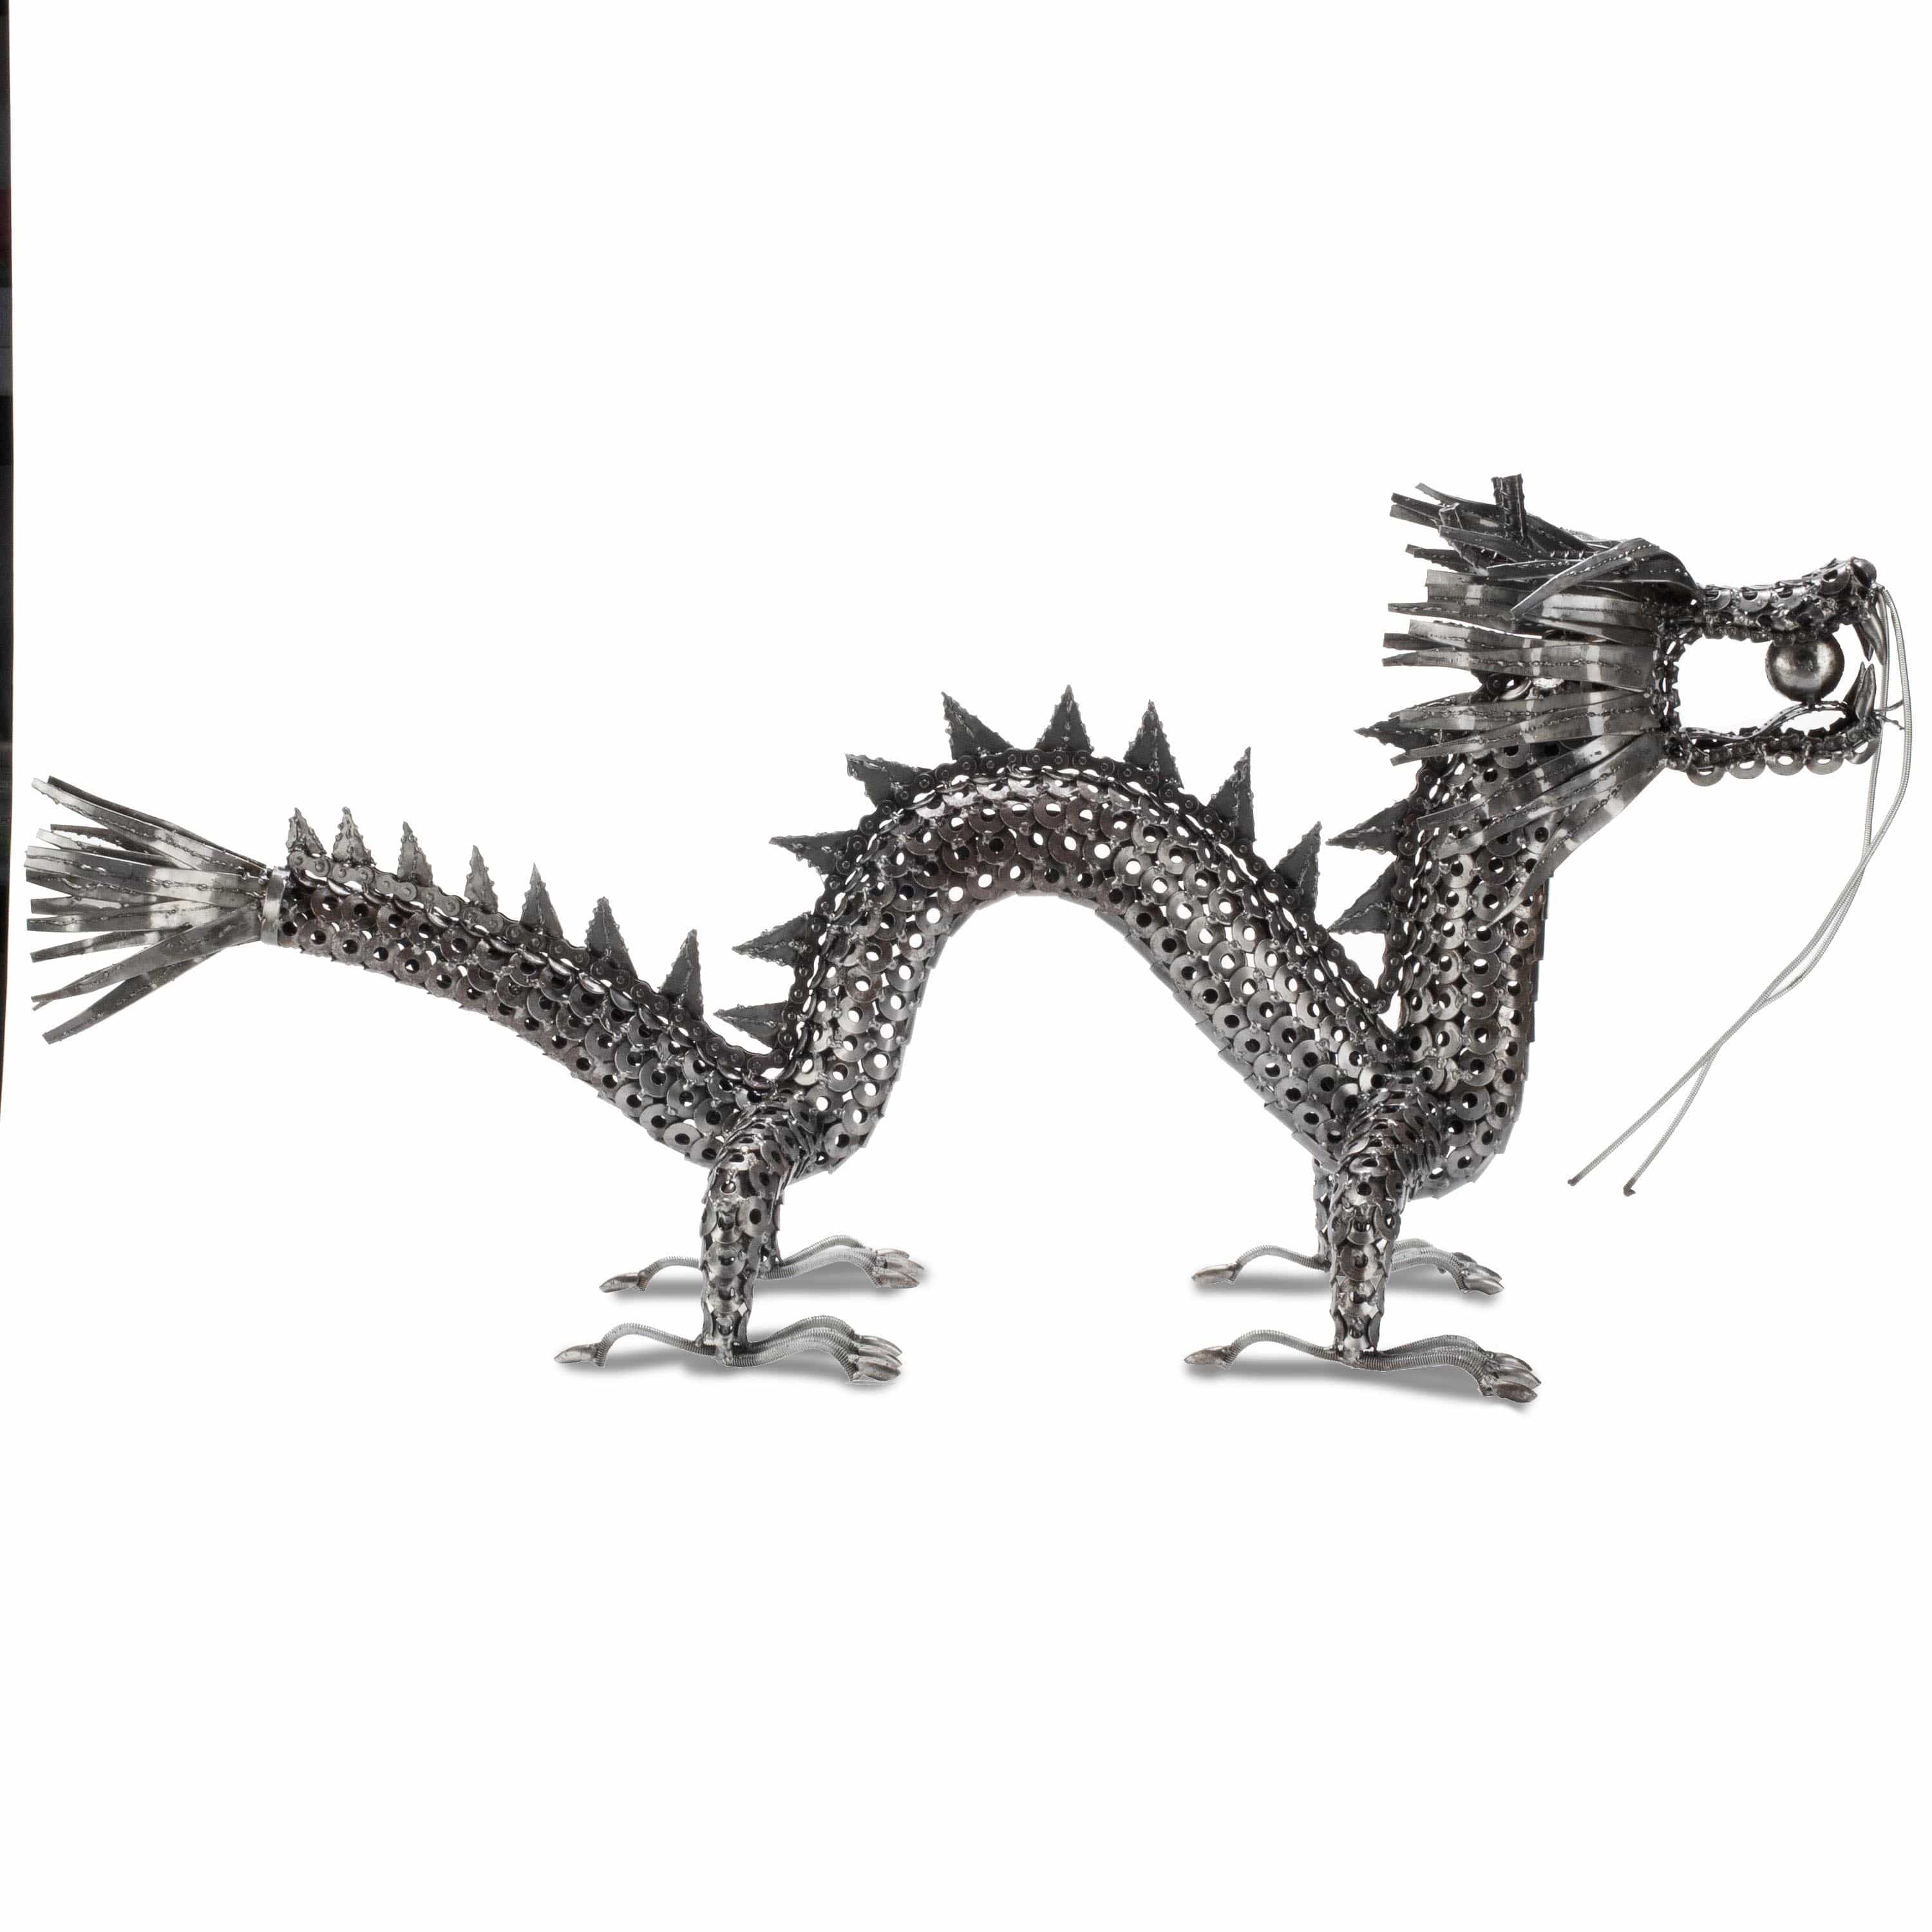 Kalifano Recycled Metal Art Chinese Dragon Inspired Recycled Metal Art Sculpture - RMS-CD45-Y